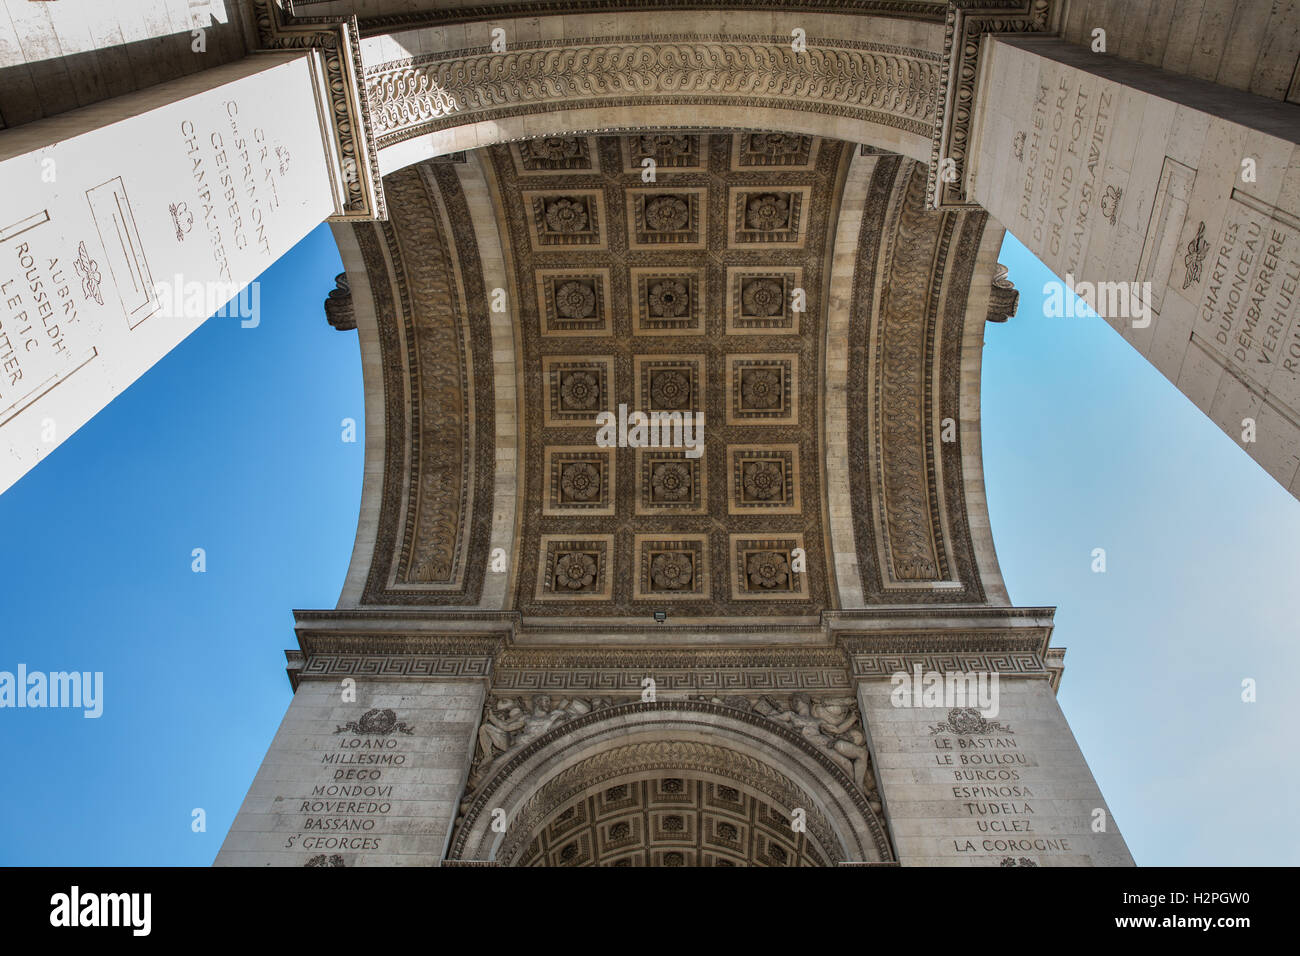 The Arc de Triomphe on the Champs-Elysees in Paris, France. Stock Photo